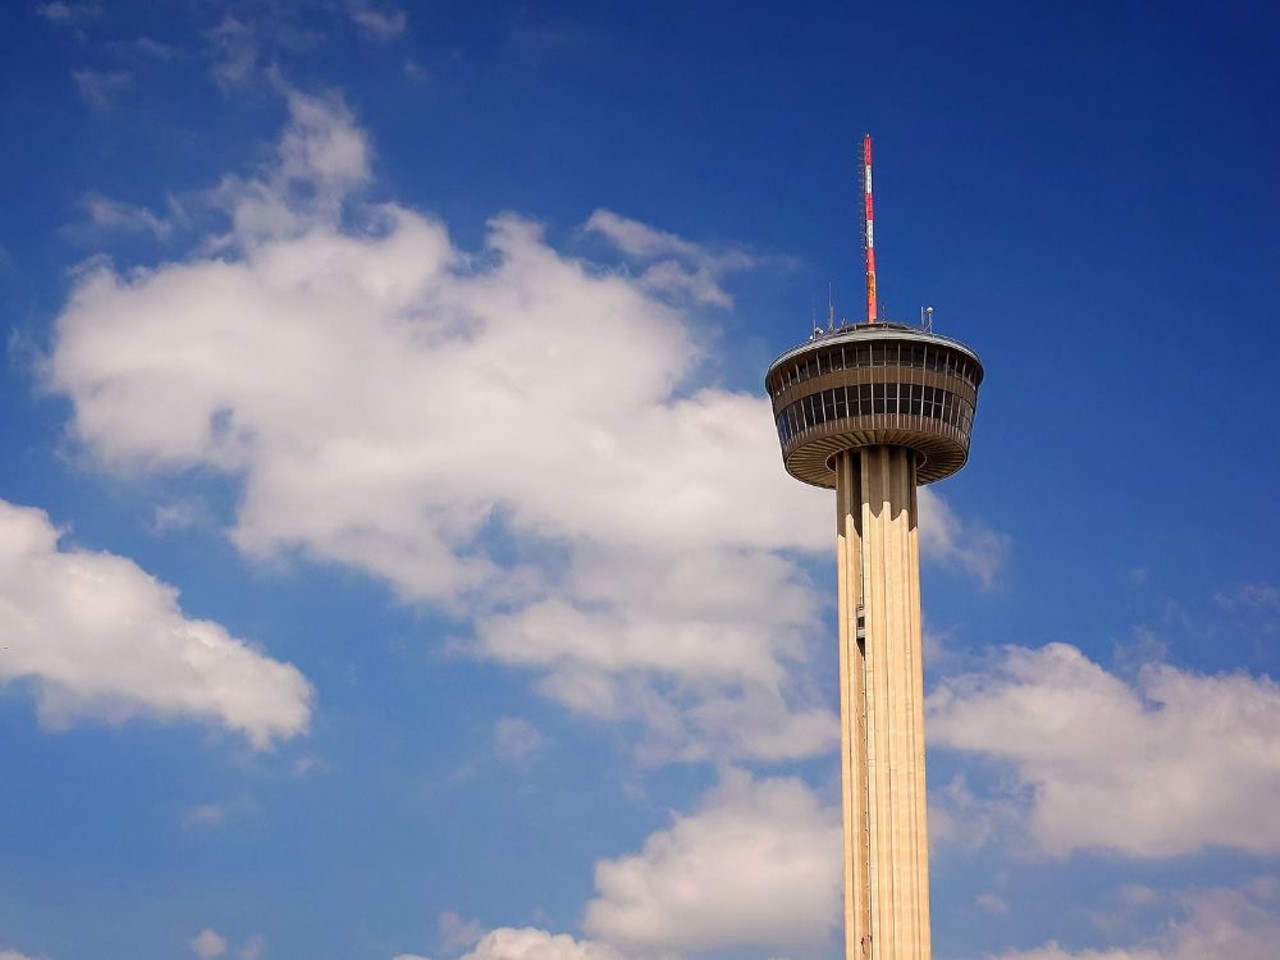 Tower of the Americas
739 E. César E. Chávez Blvd., (210) 223-3101, toweroftheamericas.com
From Oct. 13-Nov. 19, locals and tourists alike can stop by the Tower of the Americas for some pumpkin happenings. There are plenty of gourds available for purchase plus fall displays for photo ops.